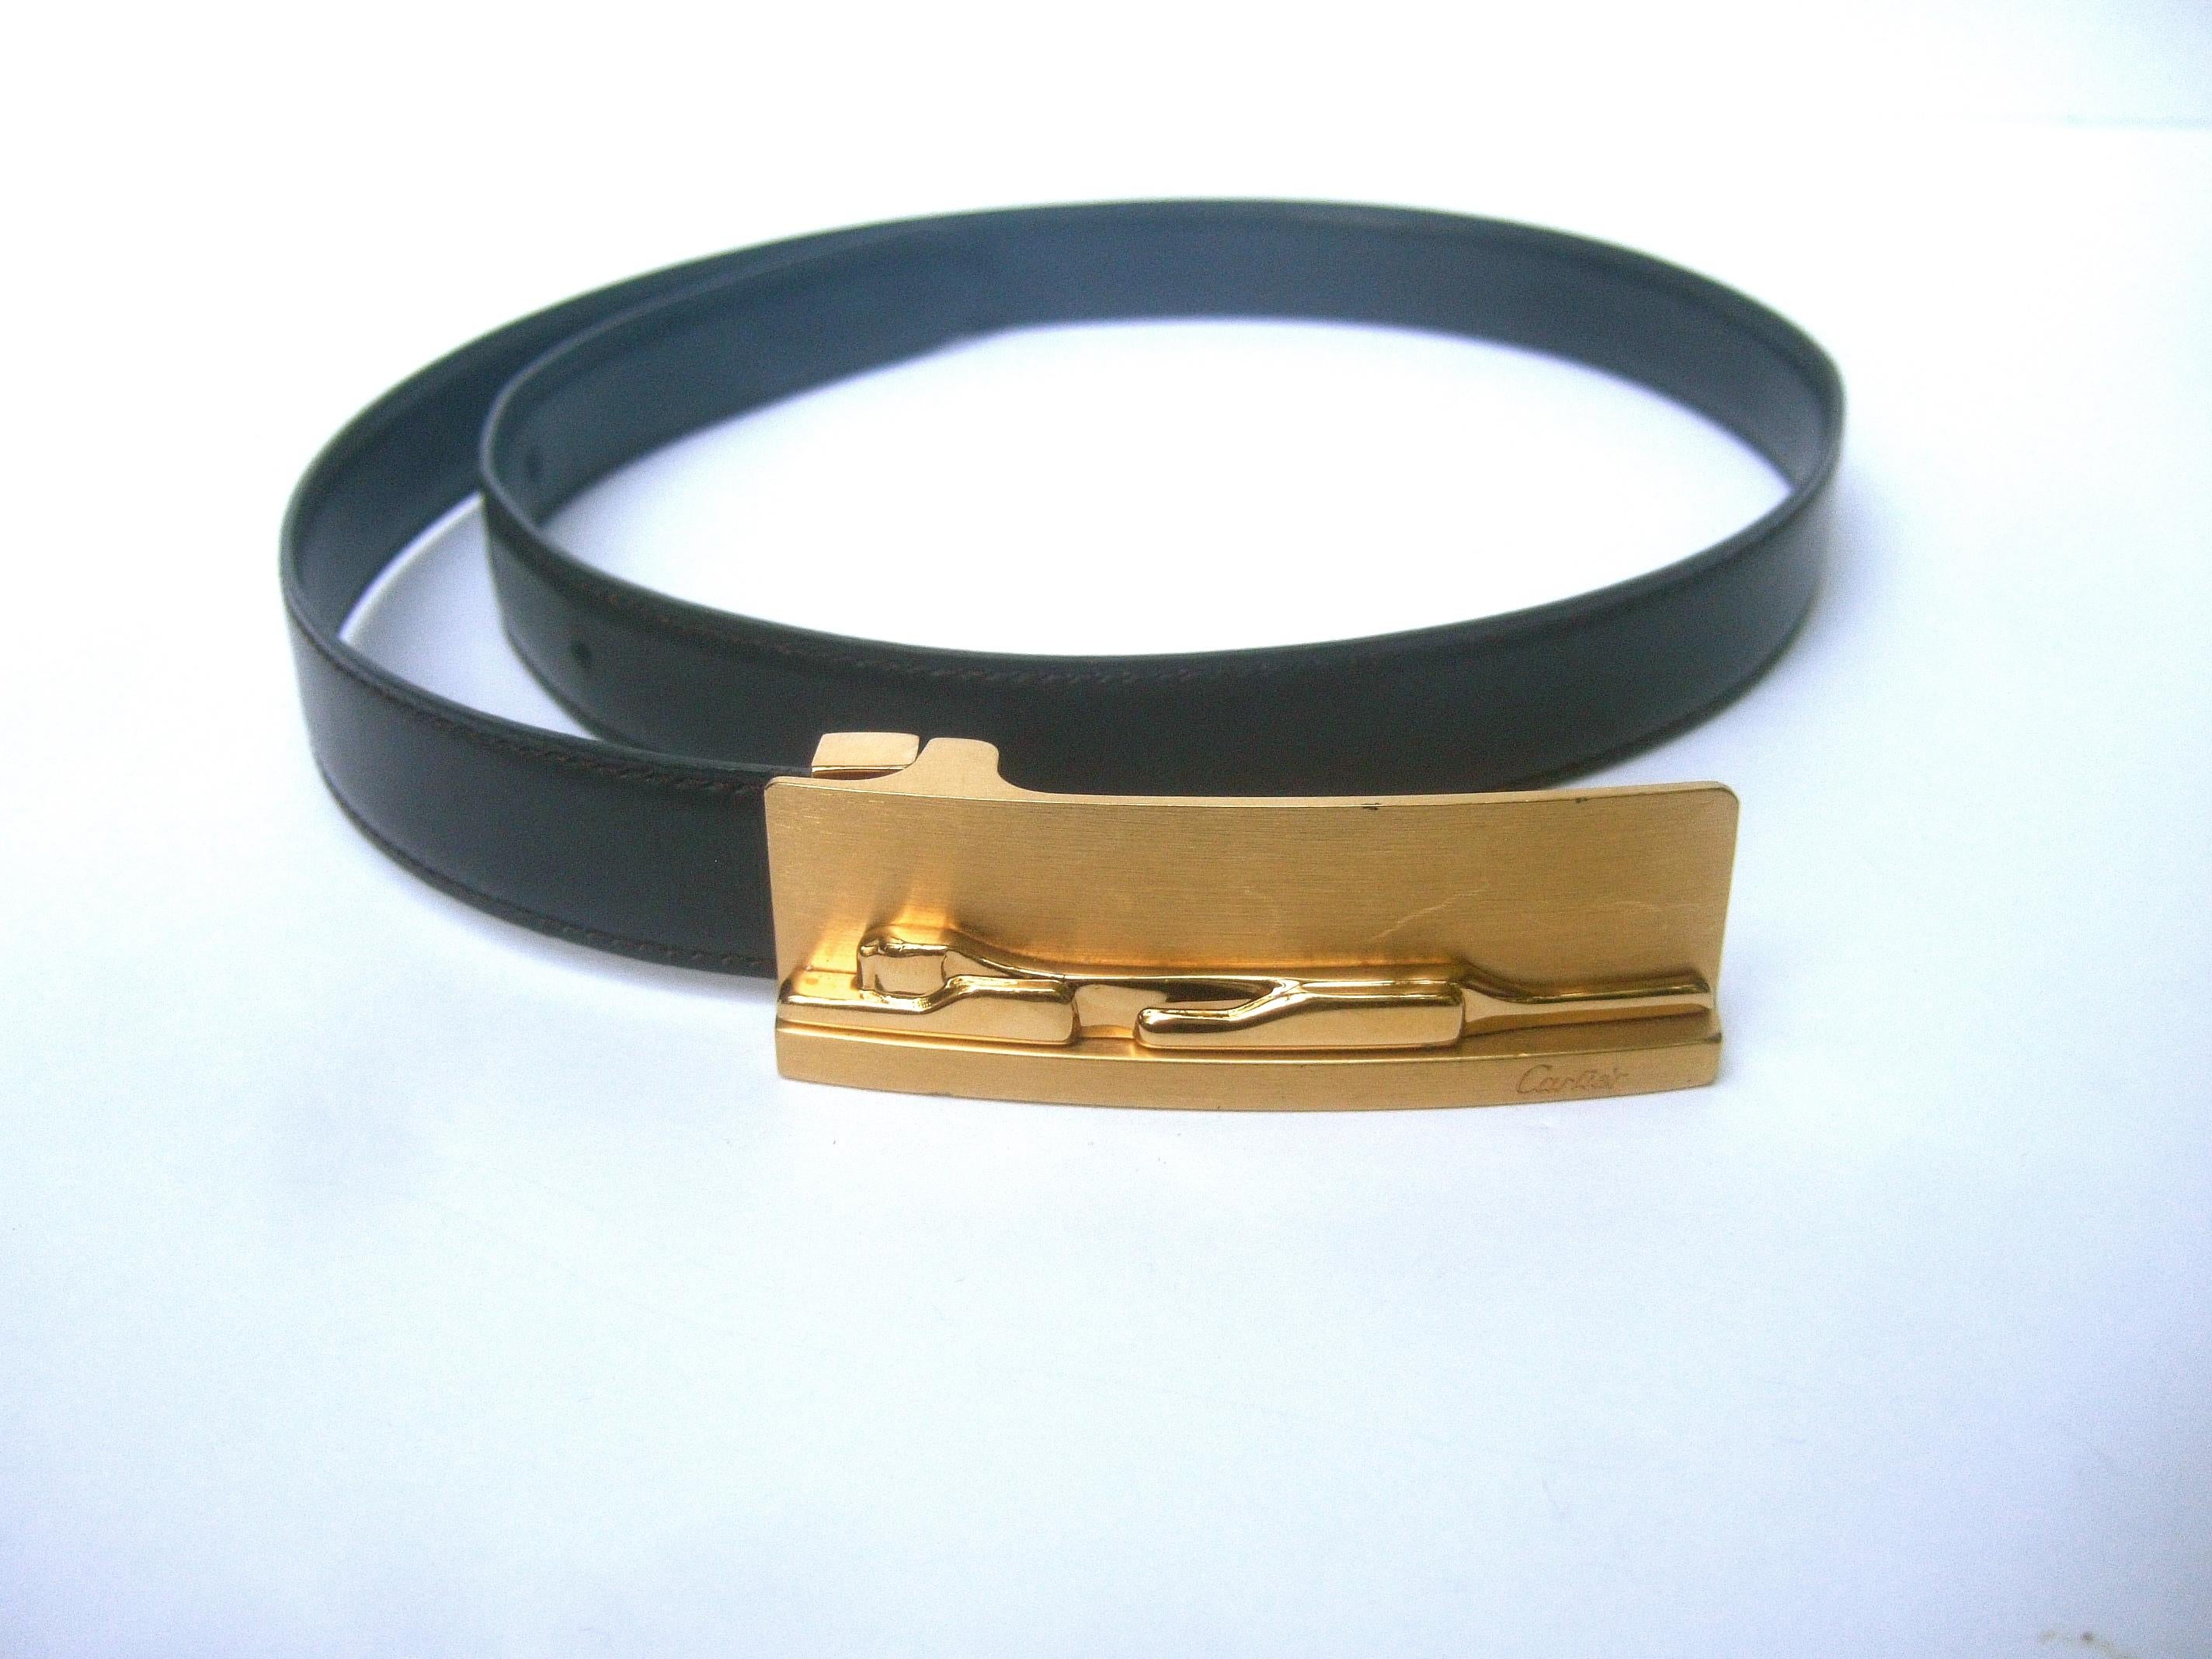 Cartier gilt metal panther buckle reversible women's belt c 1990s
The elegant belt is designed with a sleek panther figure on the gold metal buckle
The stylized panther is sheathed in shiny polished gold metal. In contrast the elongated rectangular